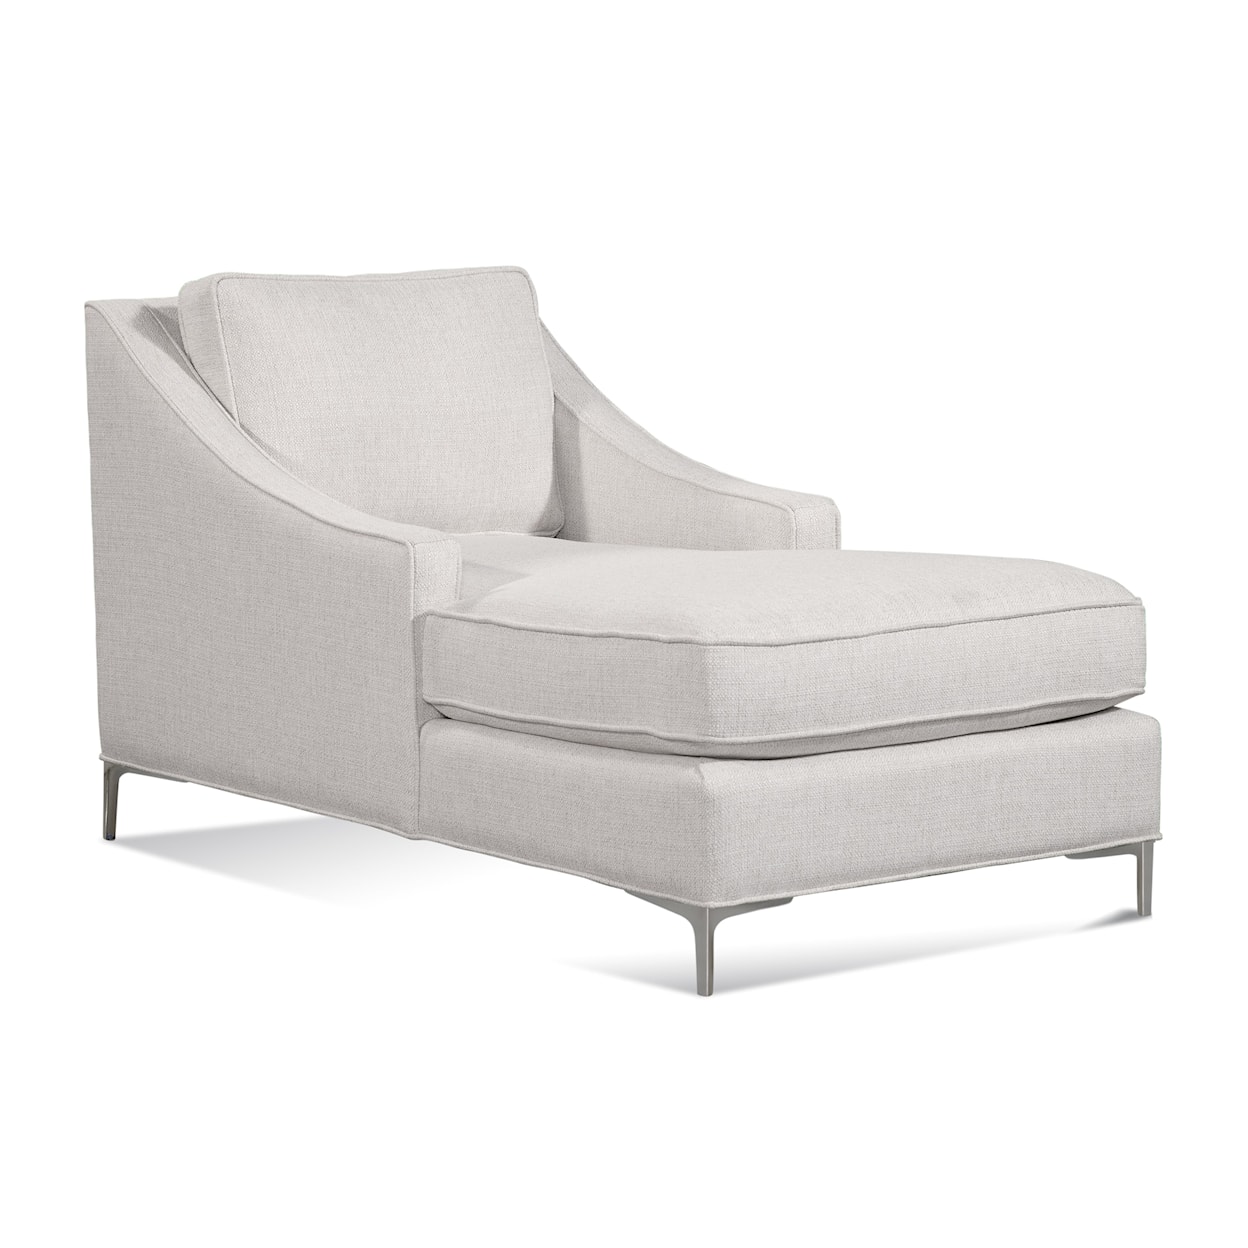 Braxton Culler Lenox Chaise Lounge with Metal Legs